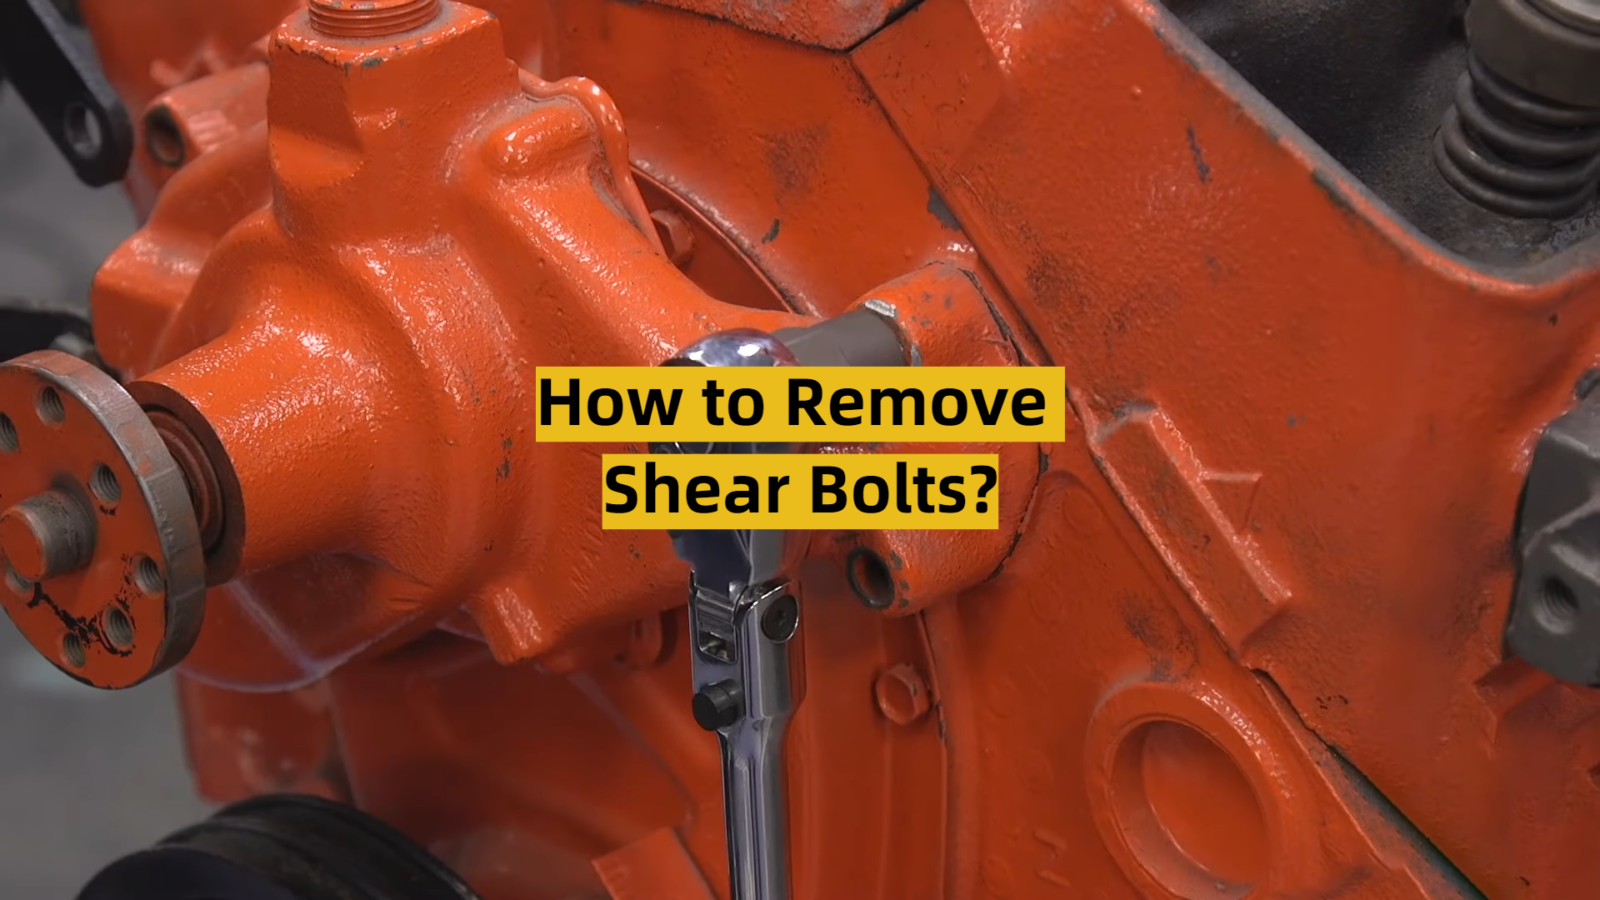 How to Remove Shear Bolts?